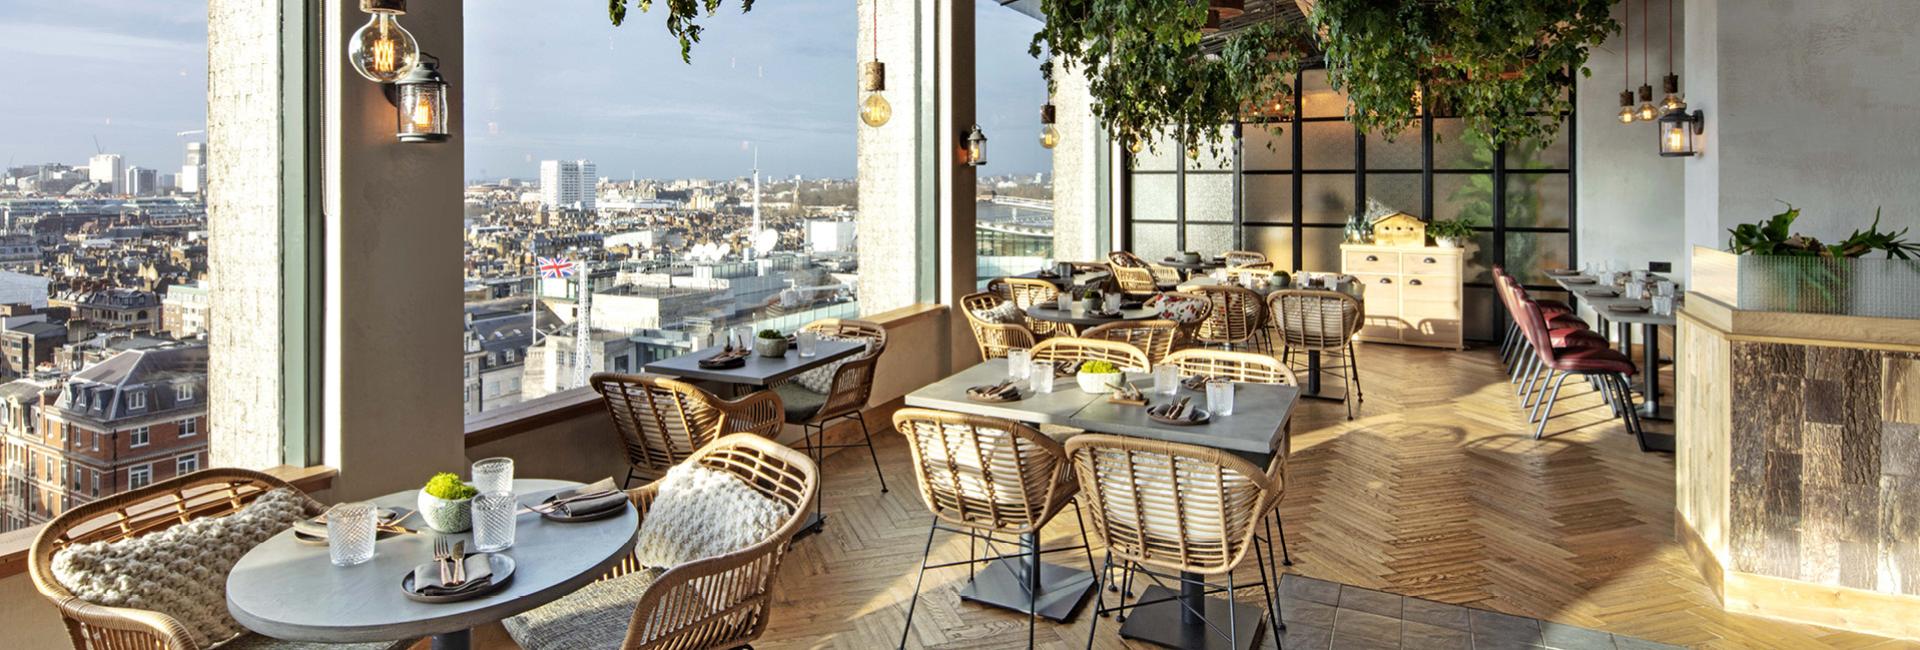 A view of the restaurant with wonderful views over London